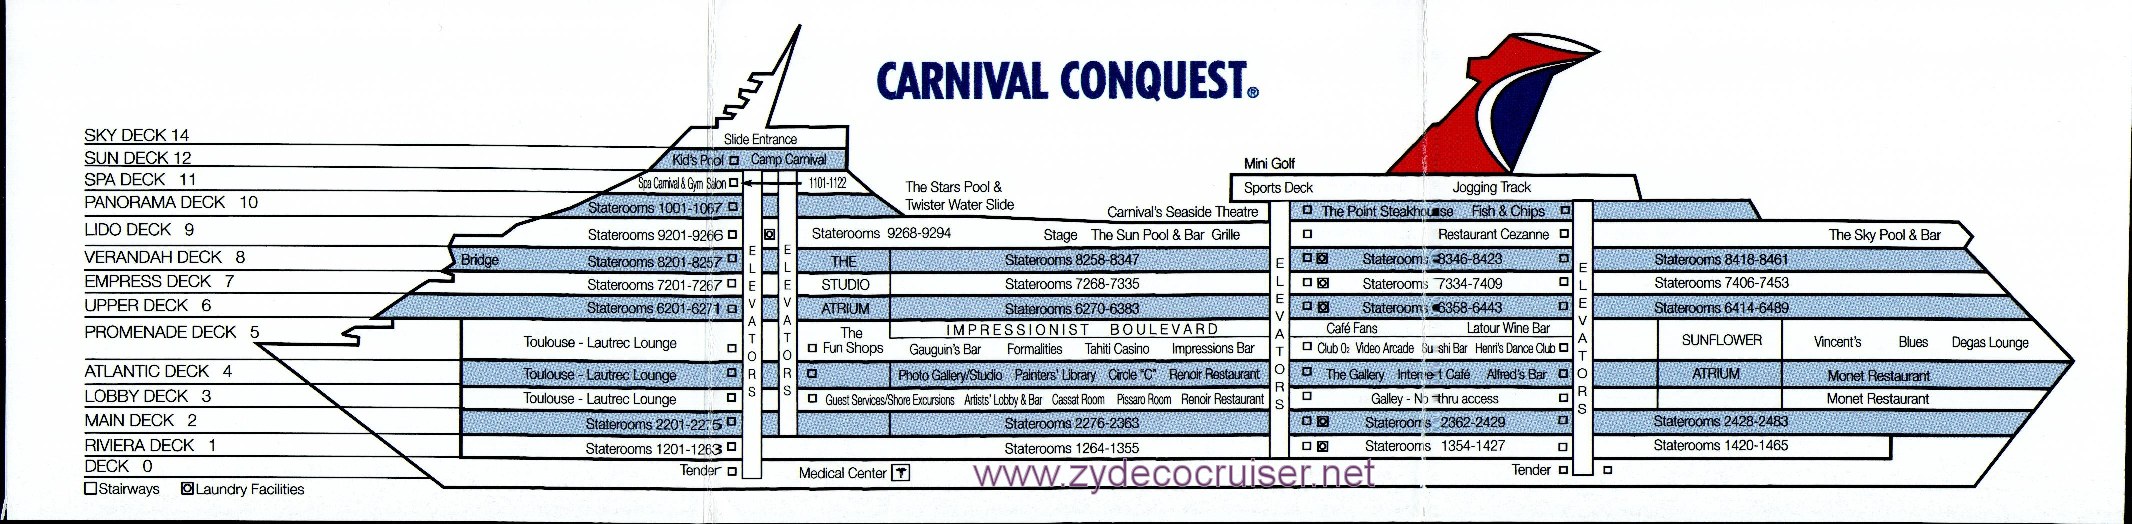 carnival cruise conquest floor plan